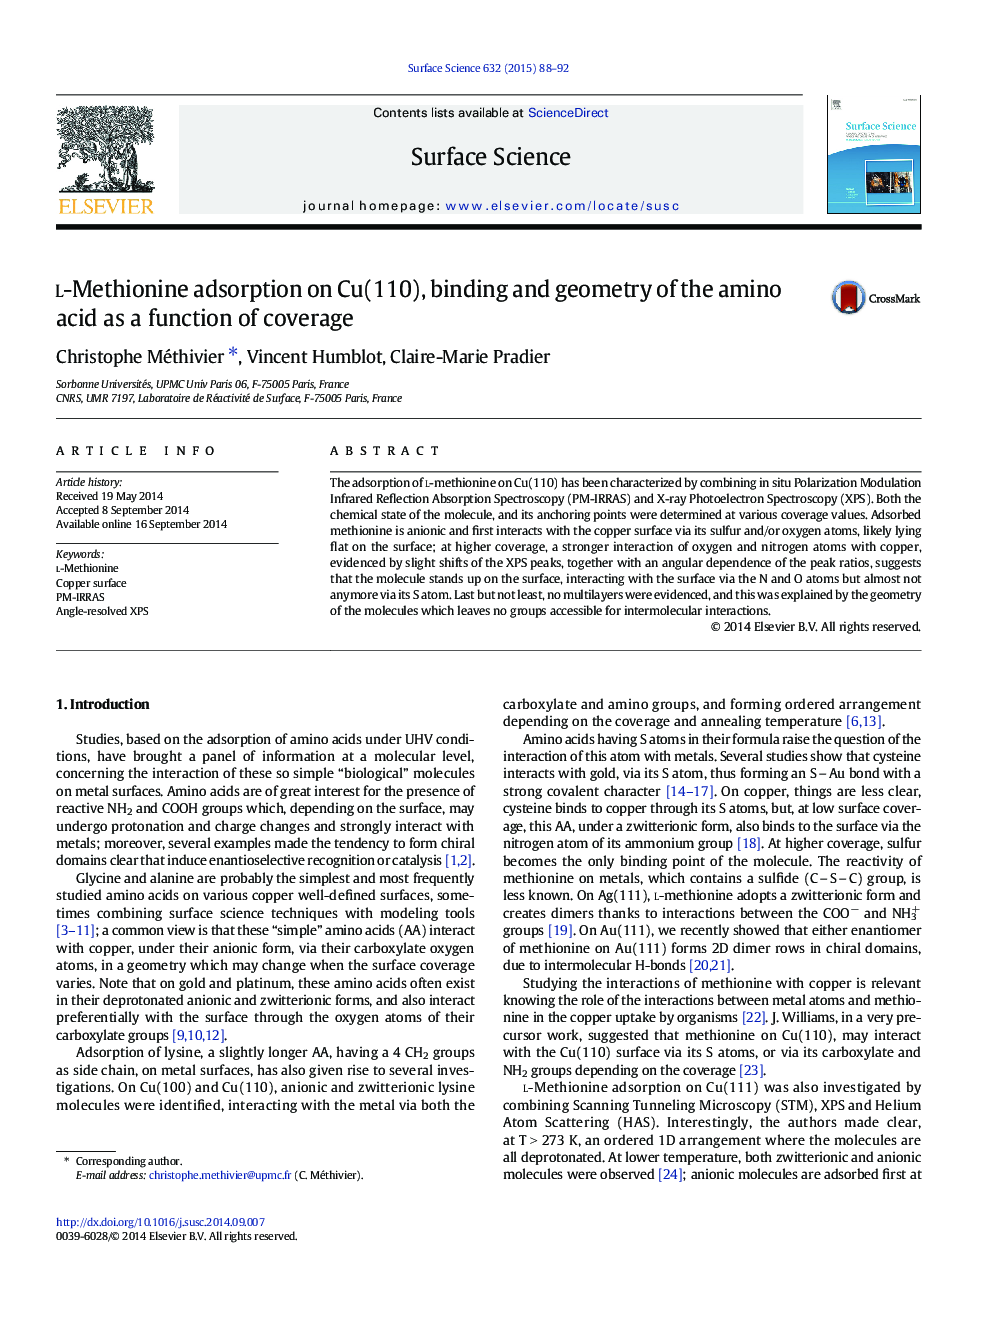 l-Methionine adsorption on Cu(110), binding and geometry of the amino acid as a function of coverage